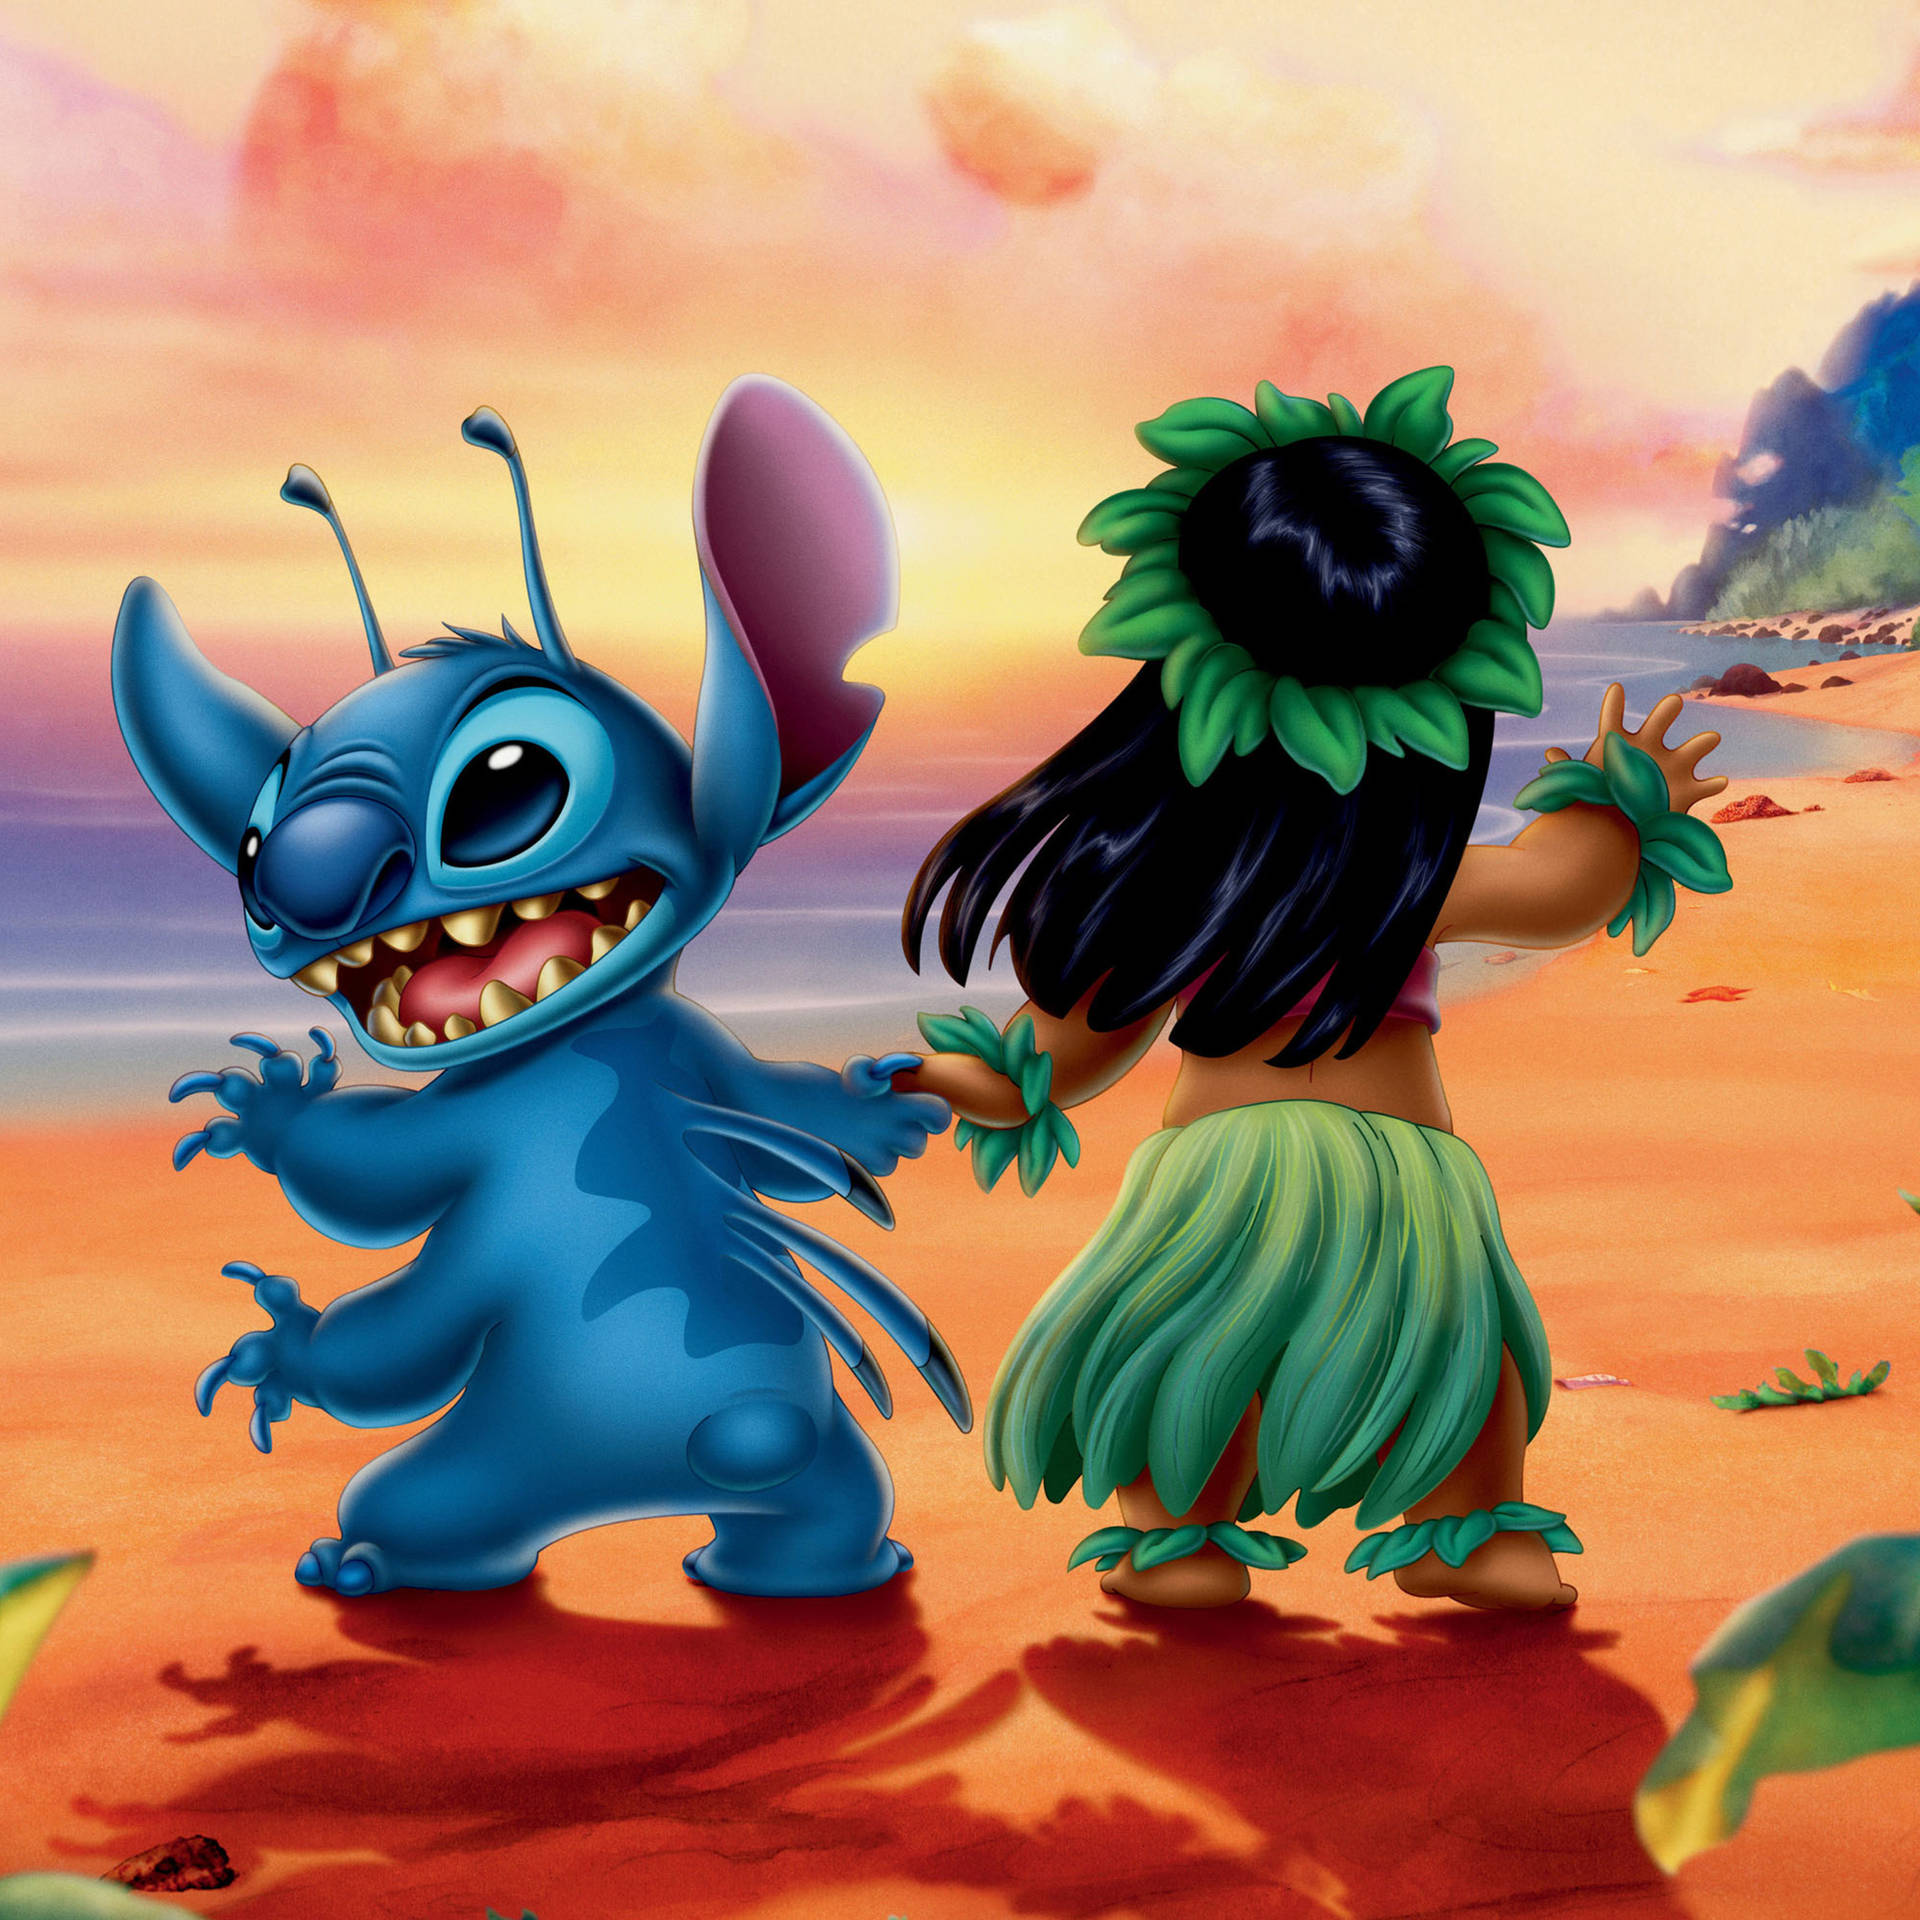 Cute Stitch 2932X2932 Wallpaper and Background Image